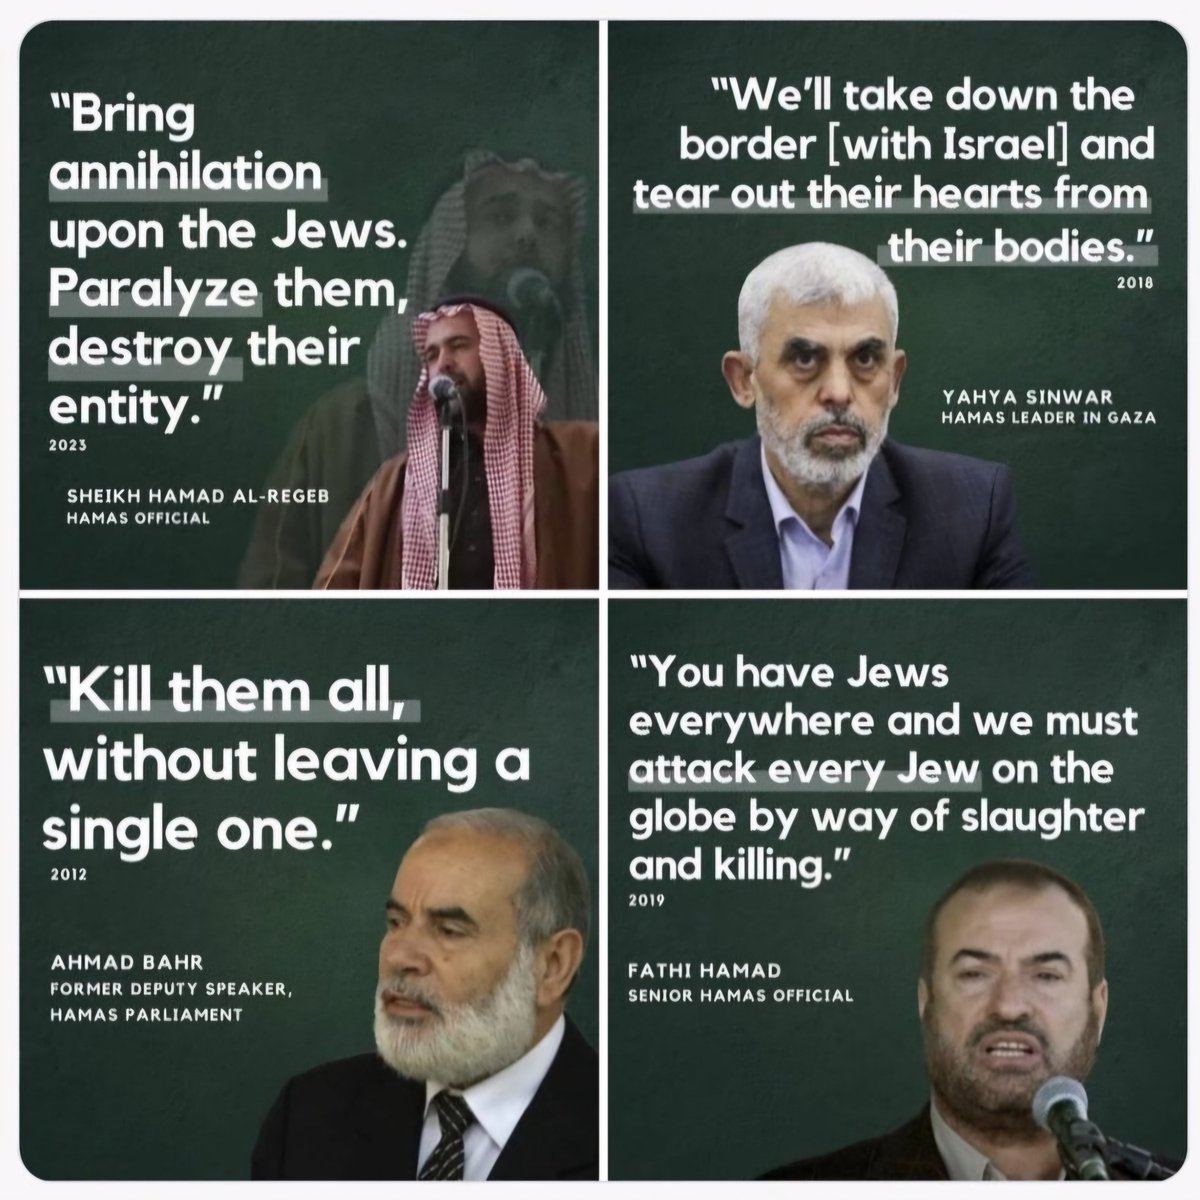 Hamas looks like all they want is peace and stuff.